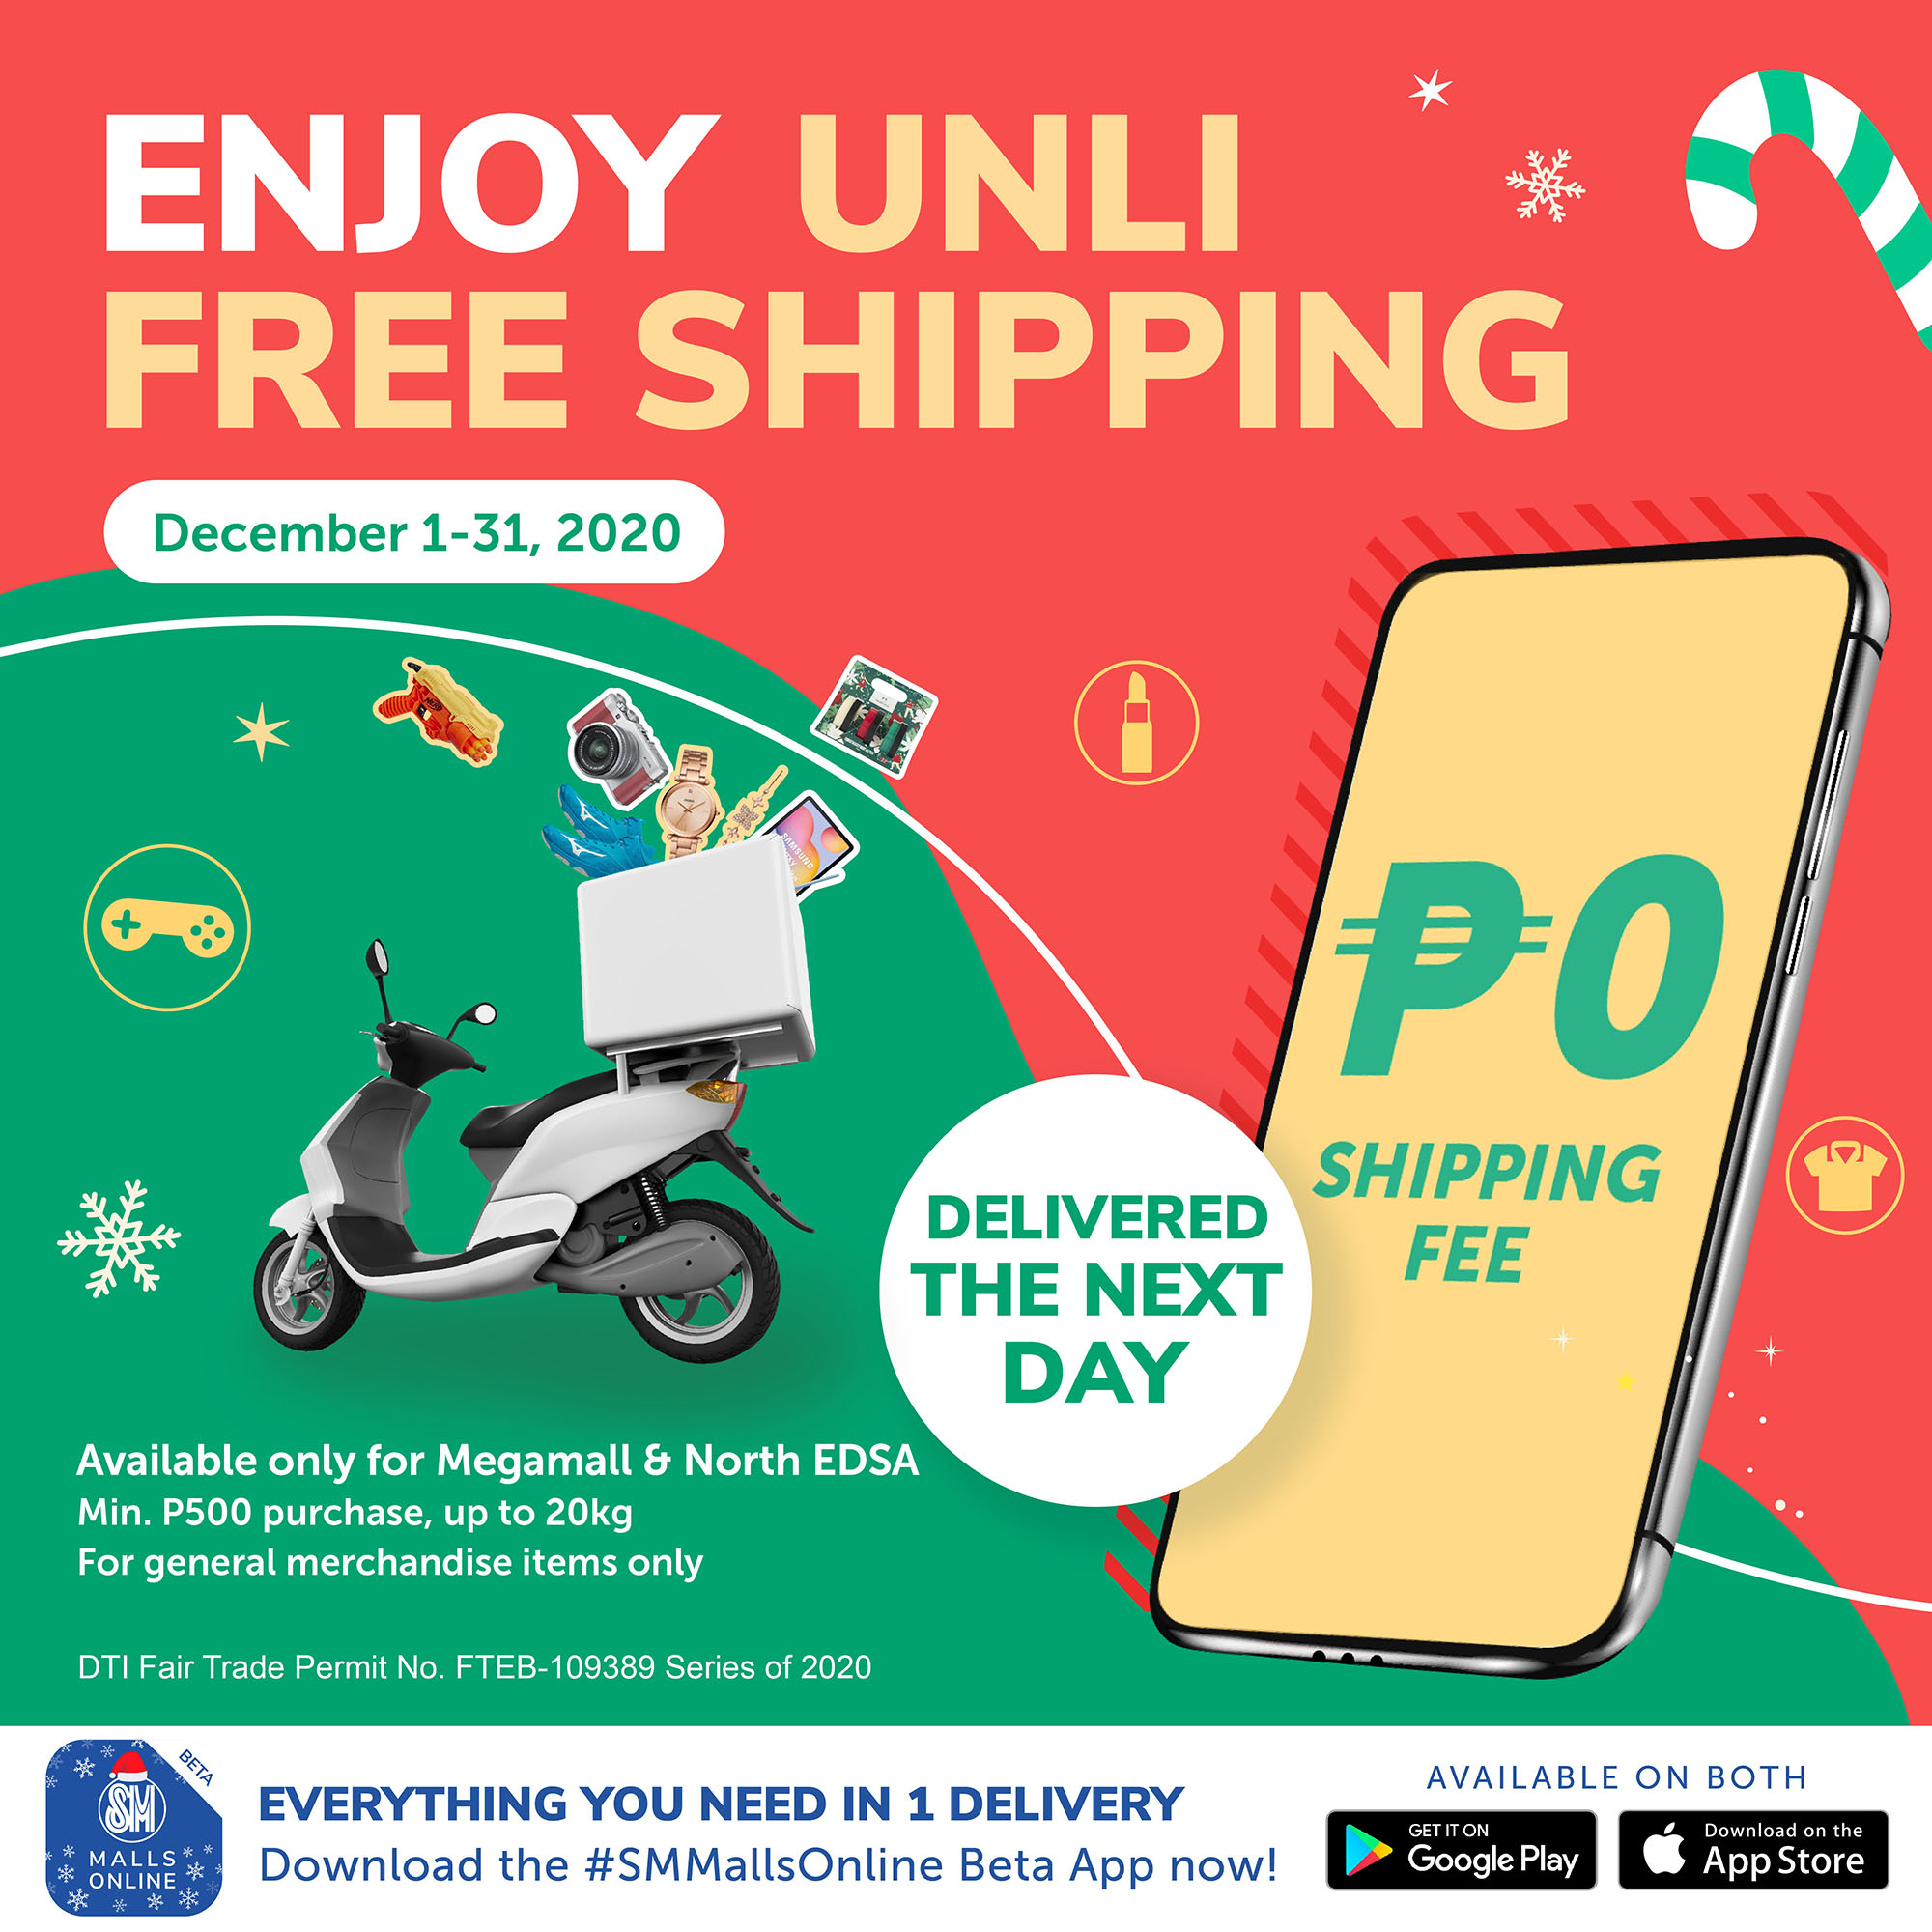 Shop via SM Malls Online mobile app and get free shipping this December!